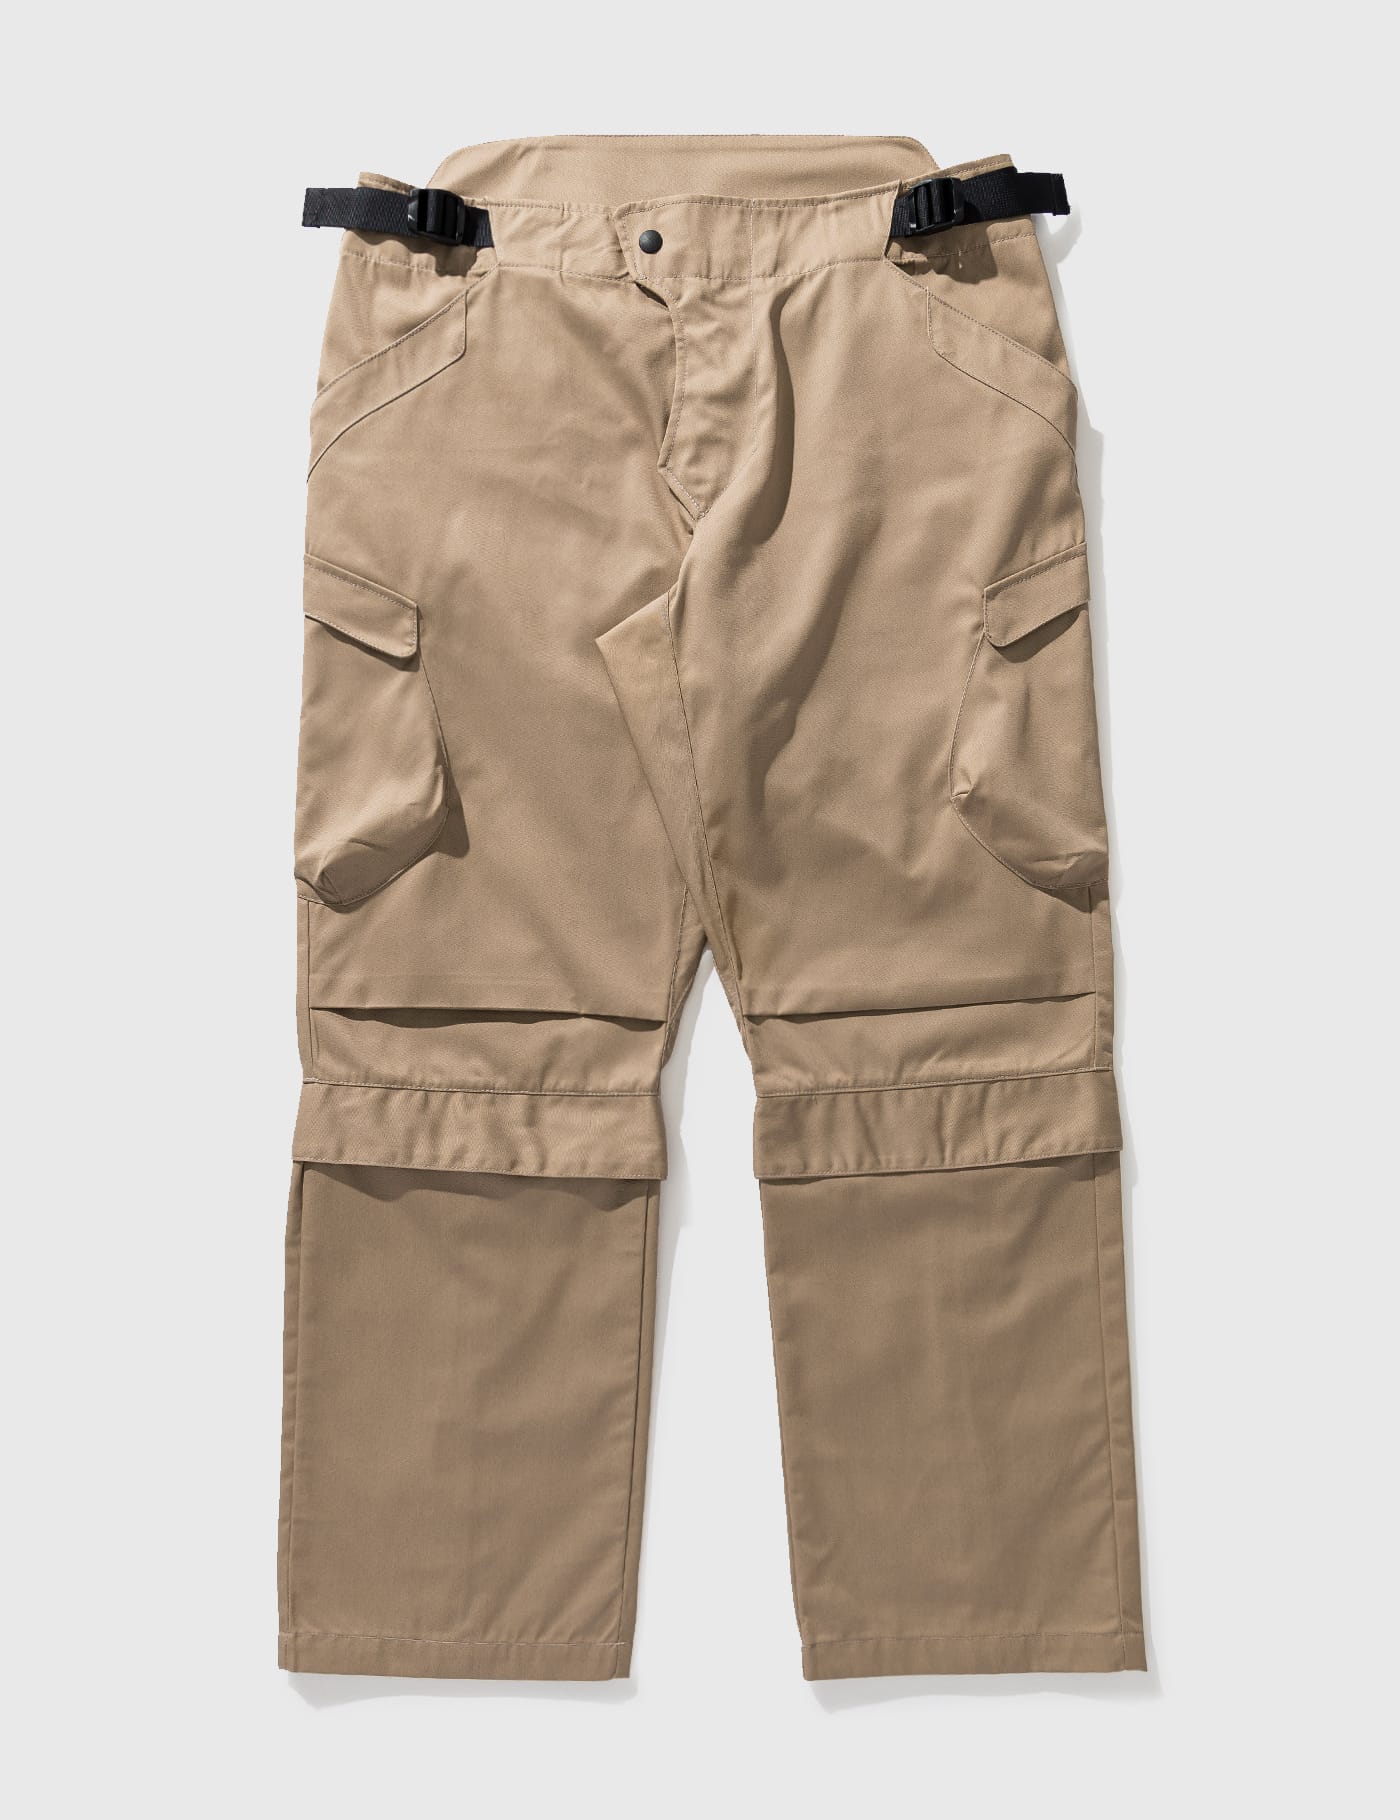 Tightbooth - BALLOON PANTS | HBX - Globally Curated Fashion and 